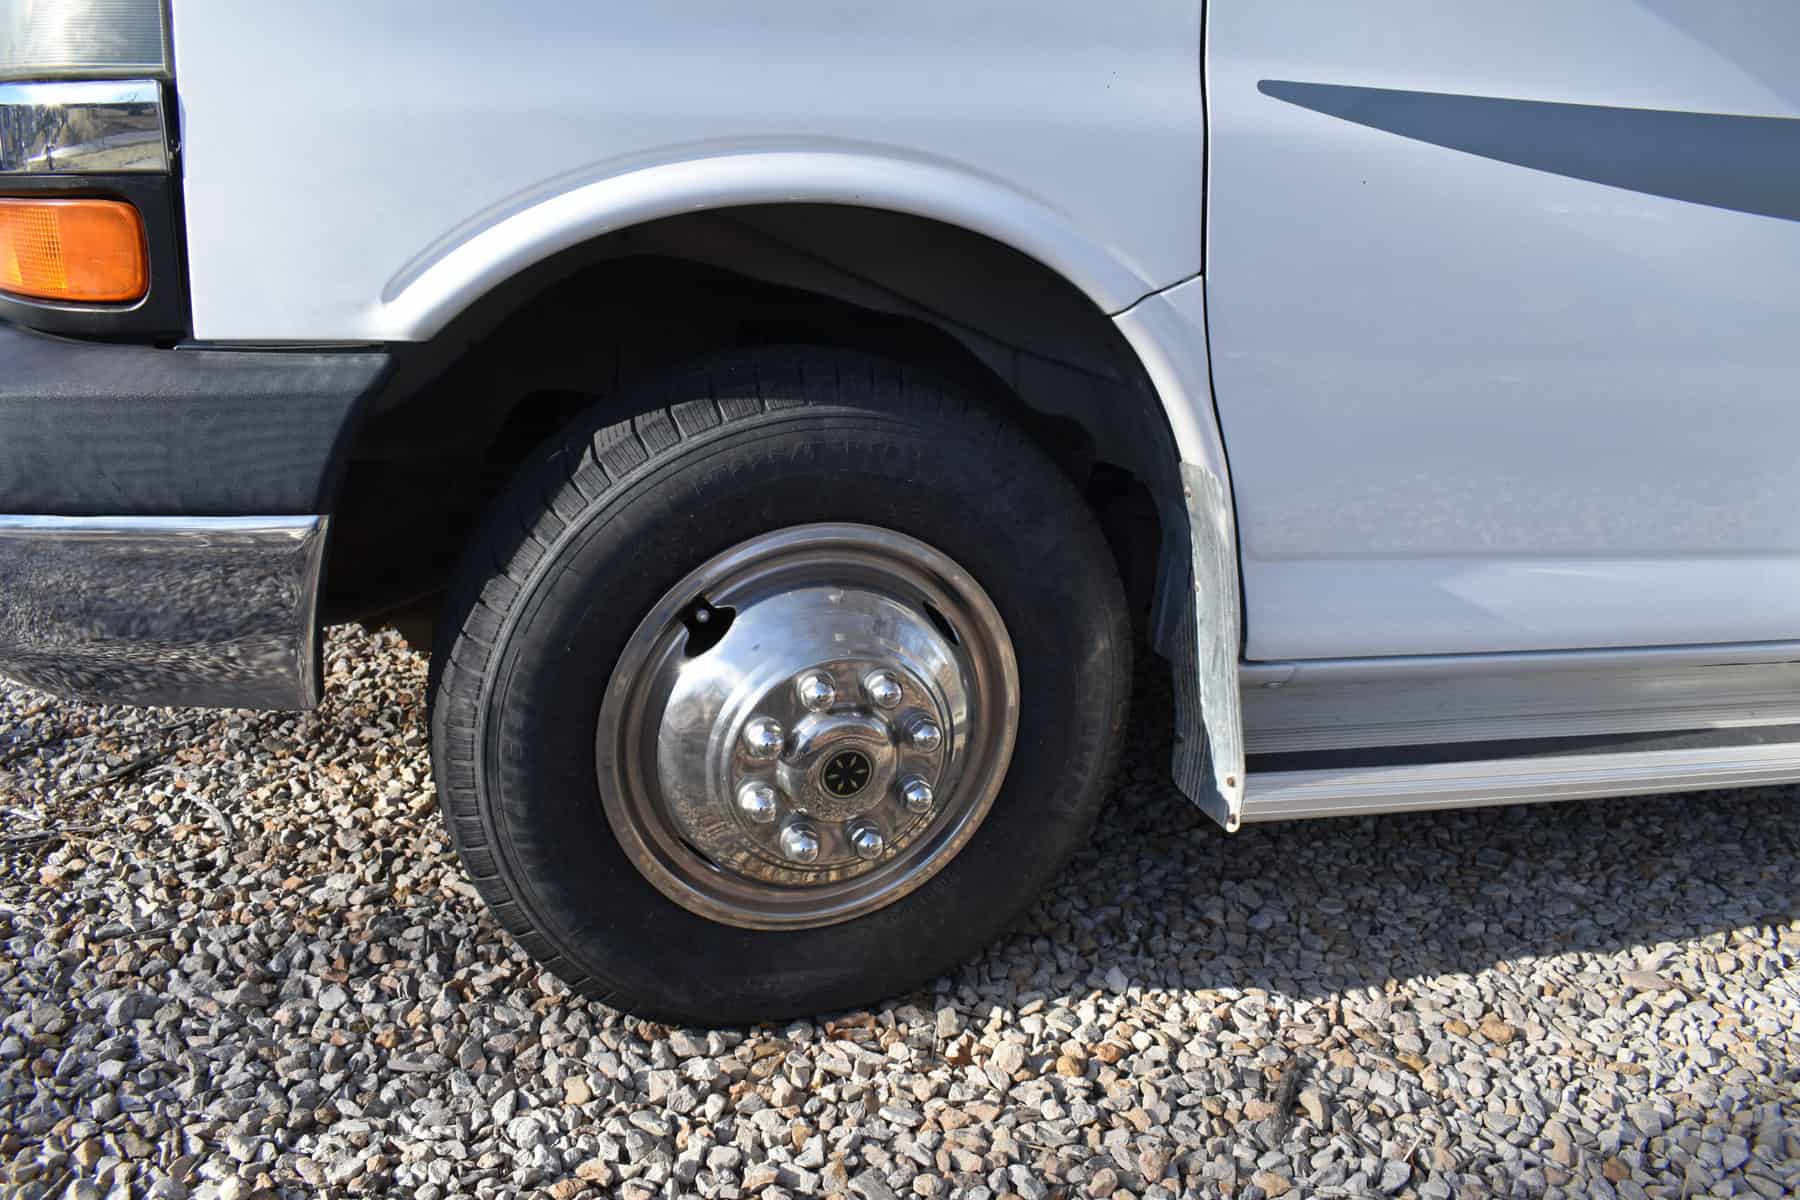 too hot for RV tires on motorhome? (Image: Shutterstock)